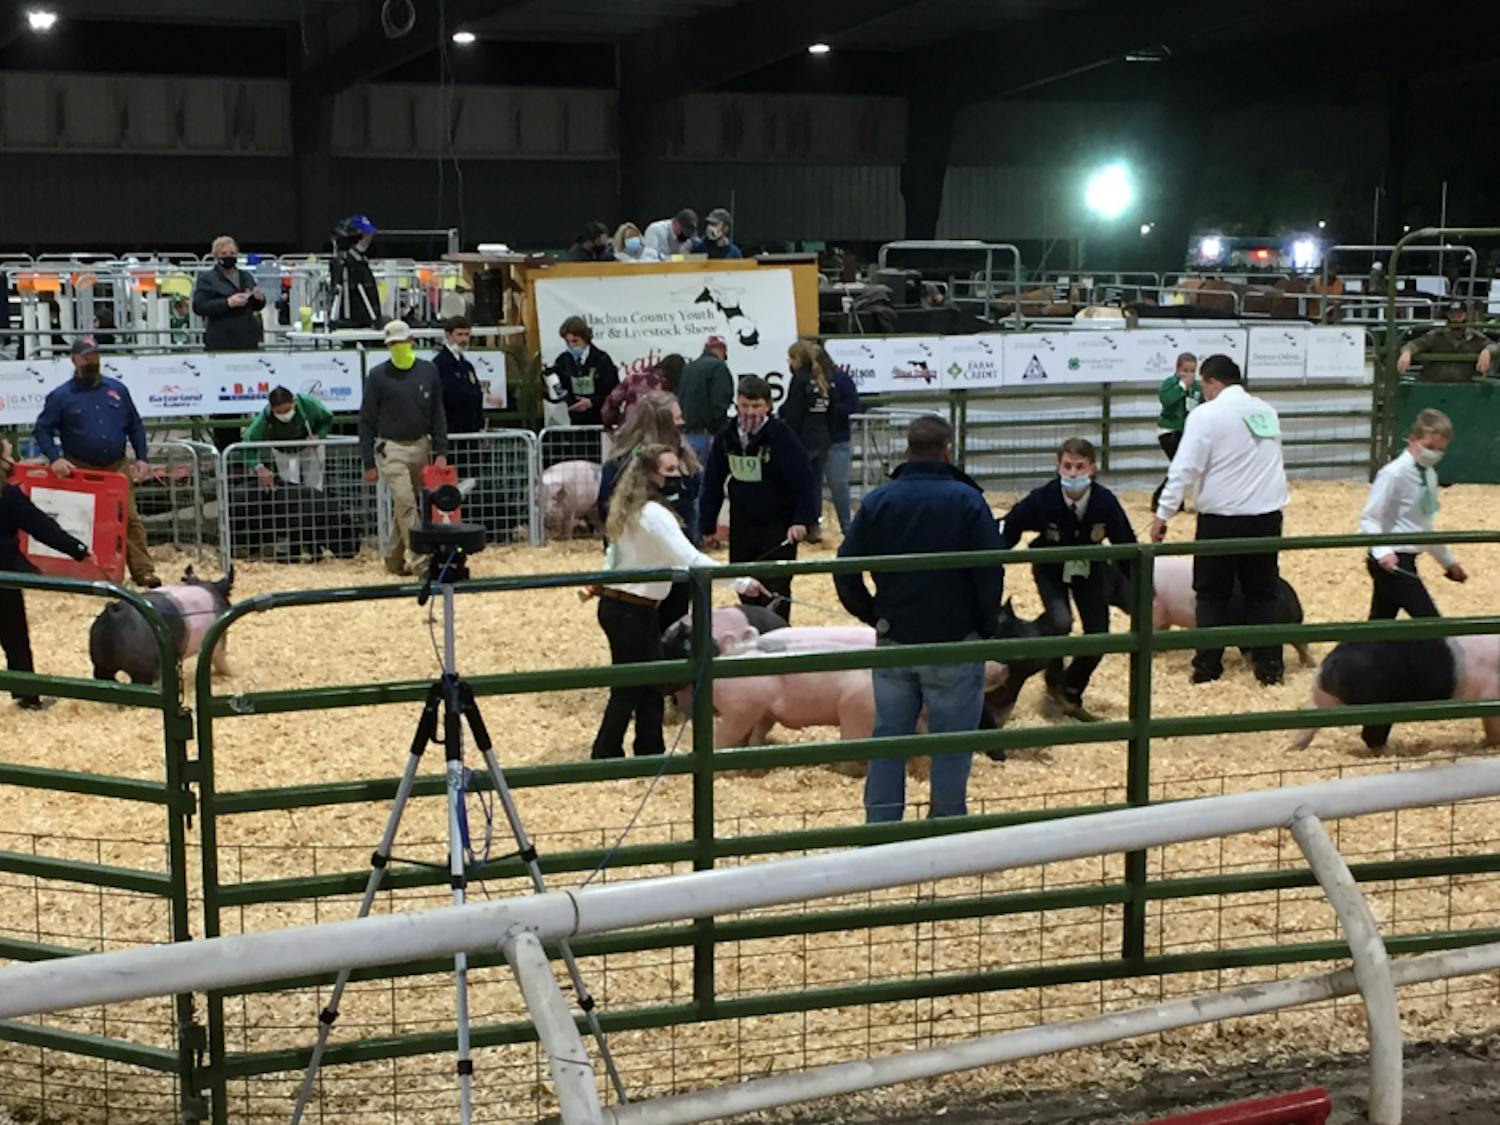 The annual event, previously held in Gainesville, was hosted at the Alachua County Agricultural and Equestrian Center in Newberry for the first time this year.